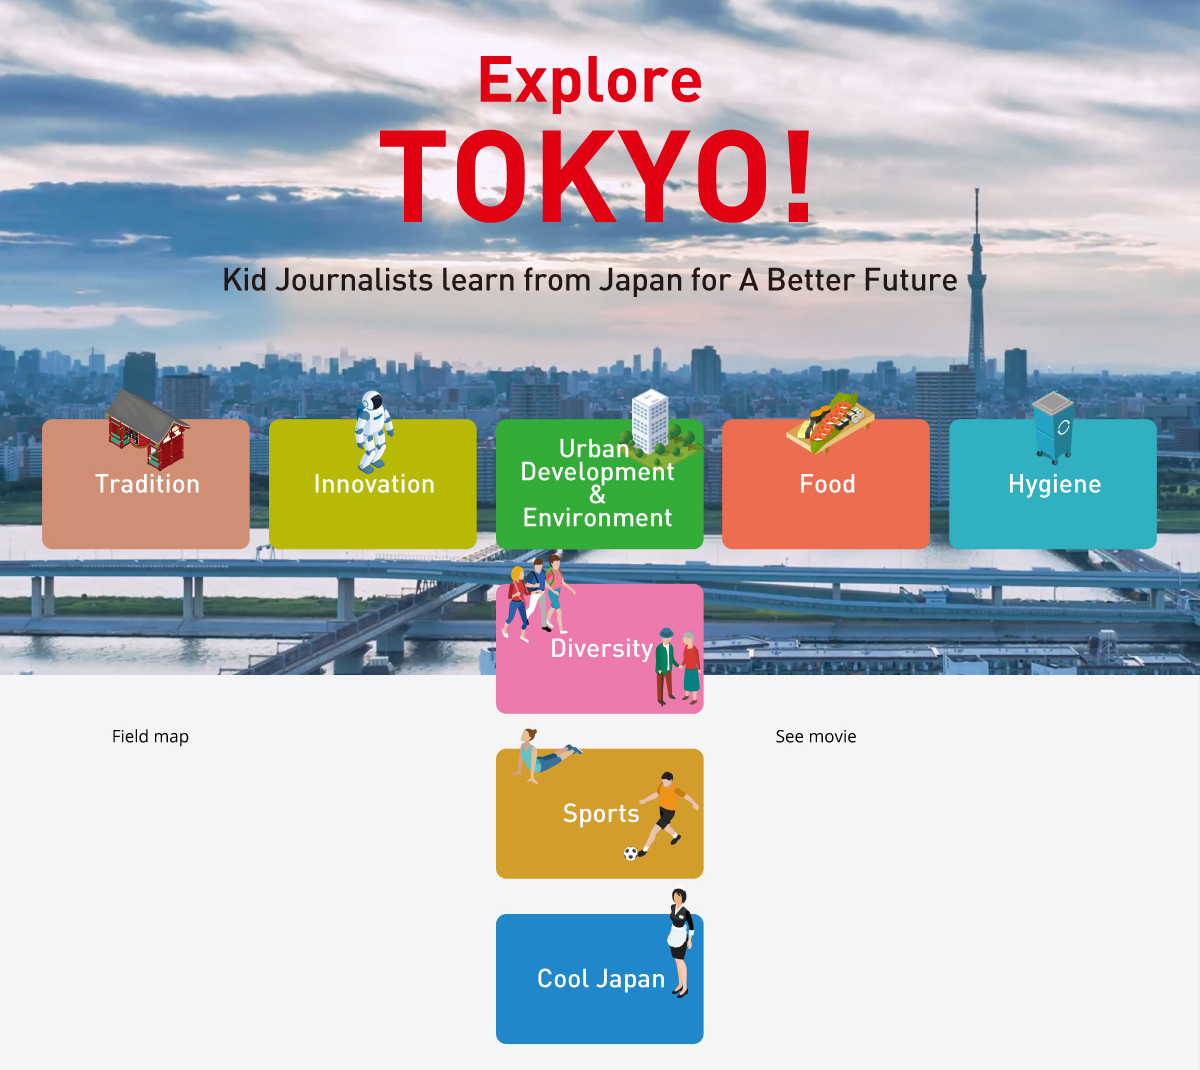 Explore TOKYO! Kid Journalists learn From Japan For A Better Future